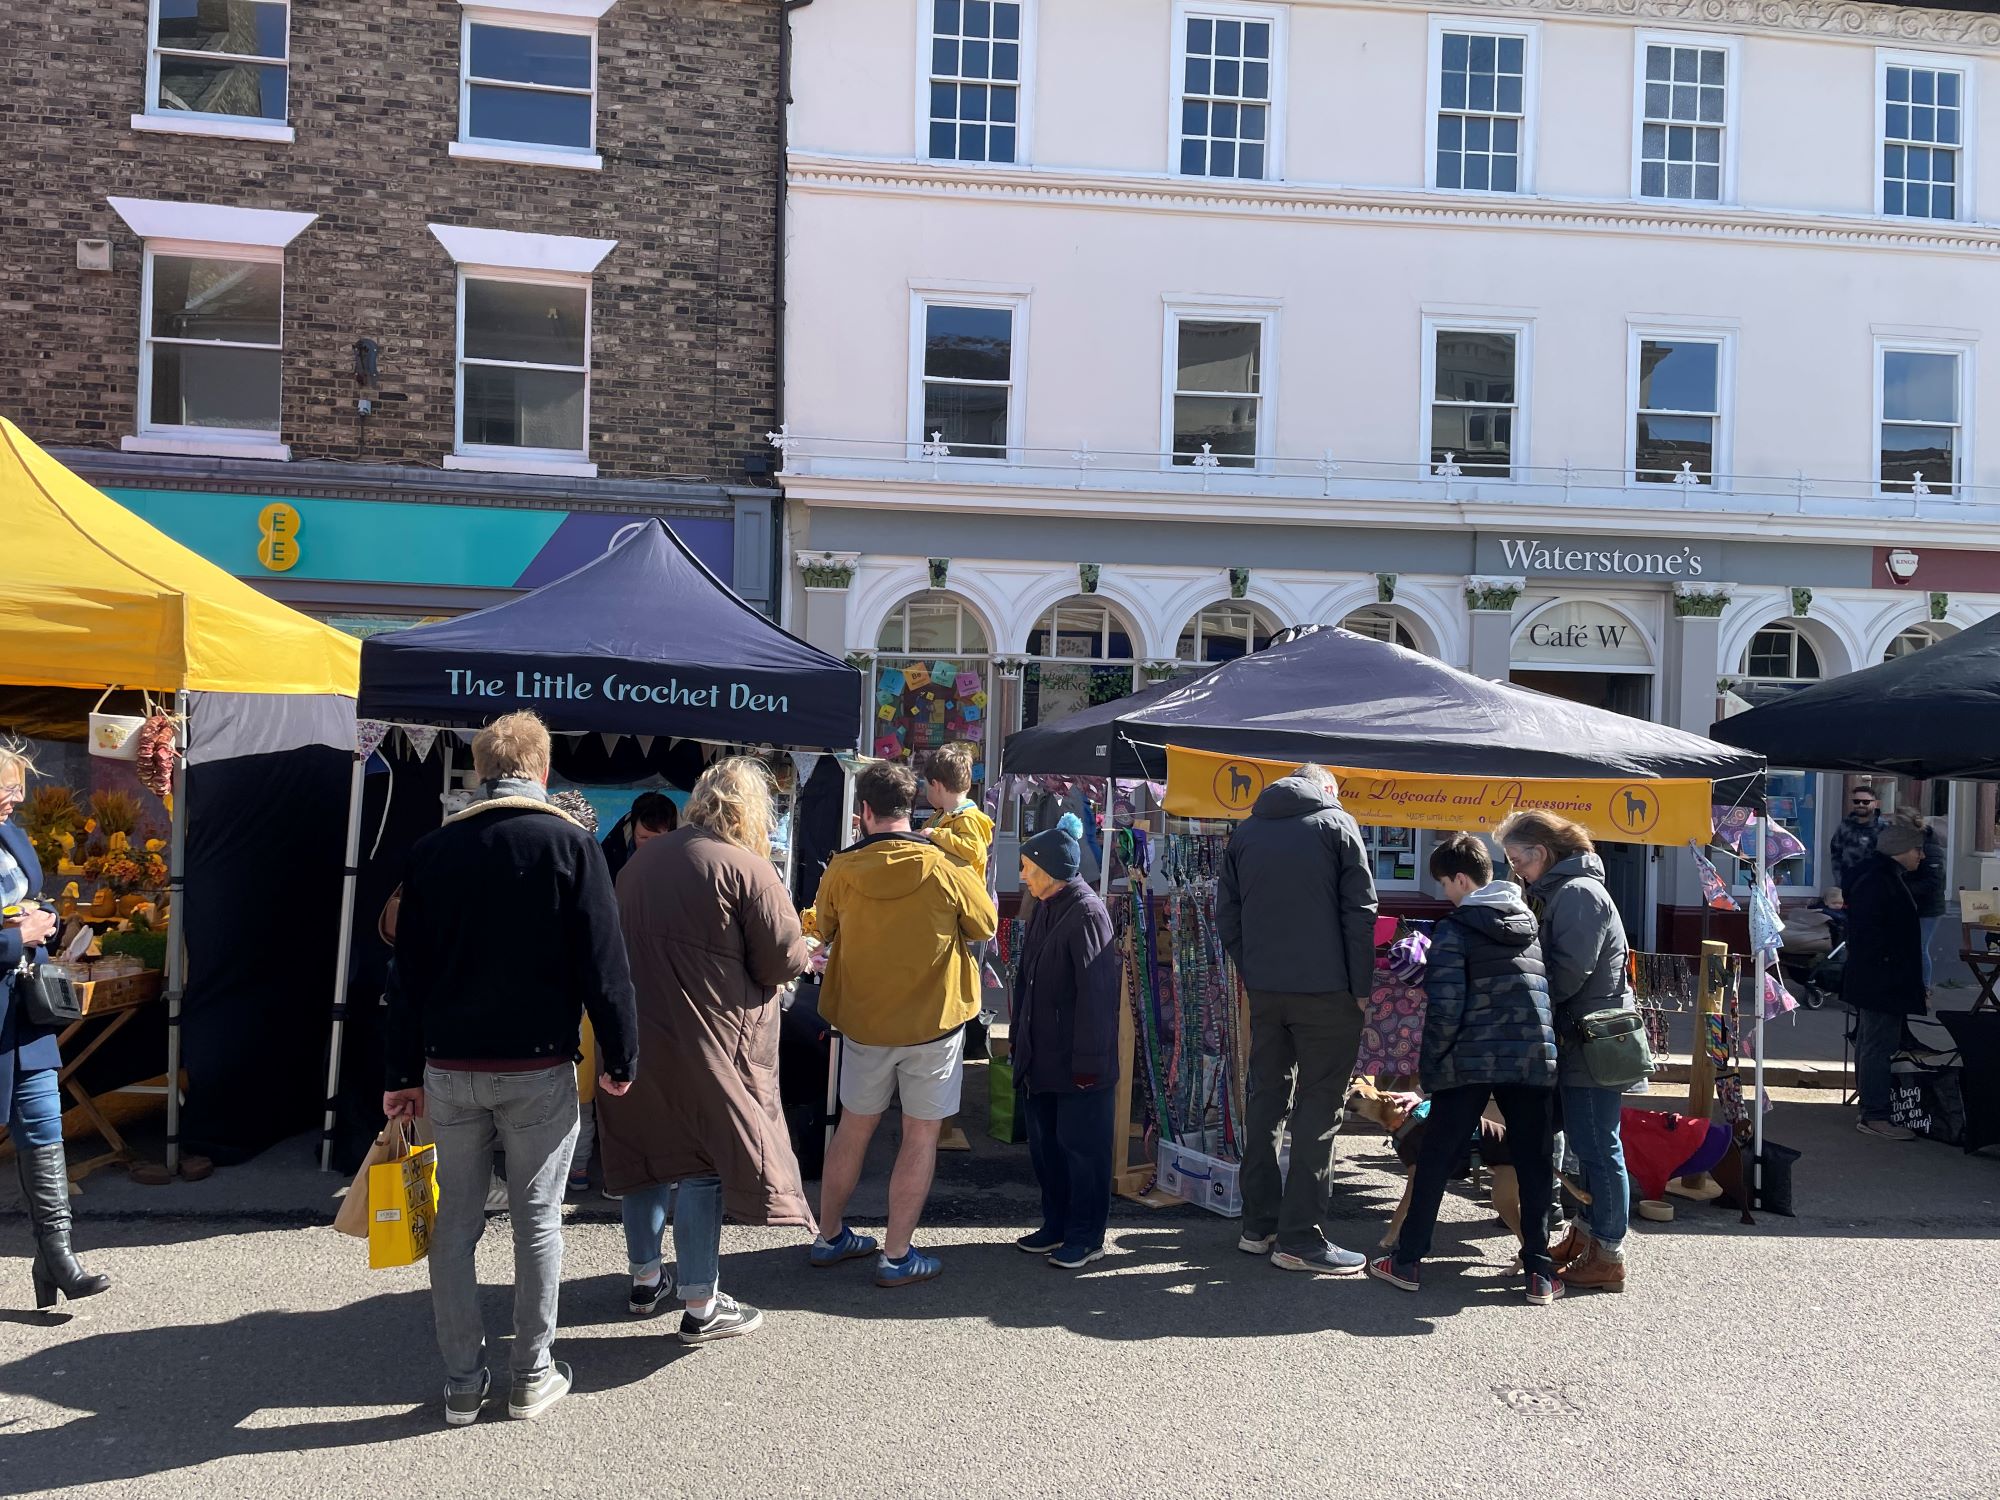 Image of people looking at a market stall